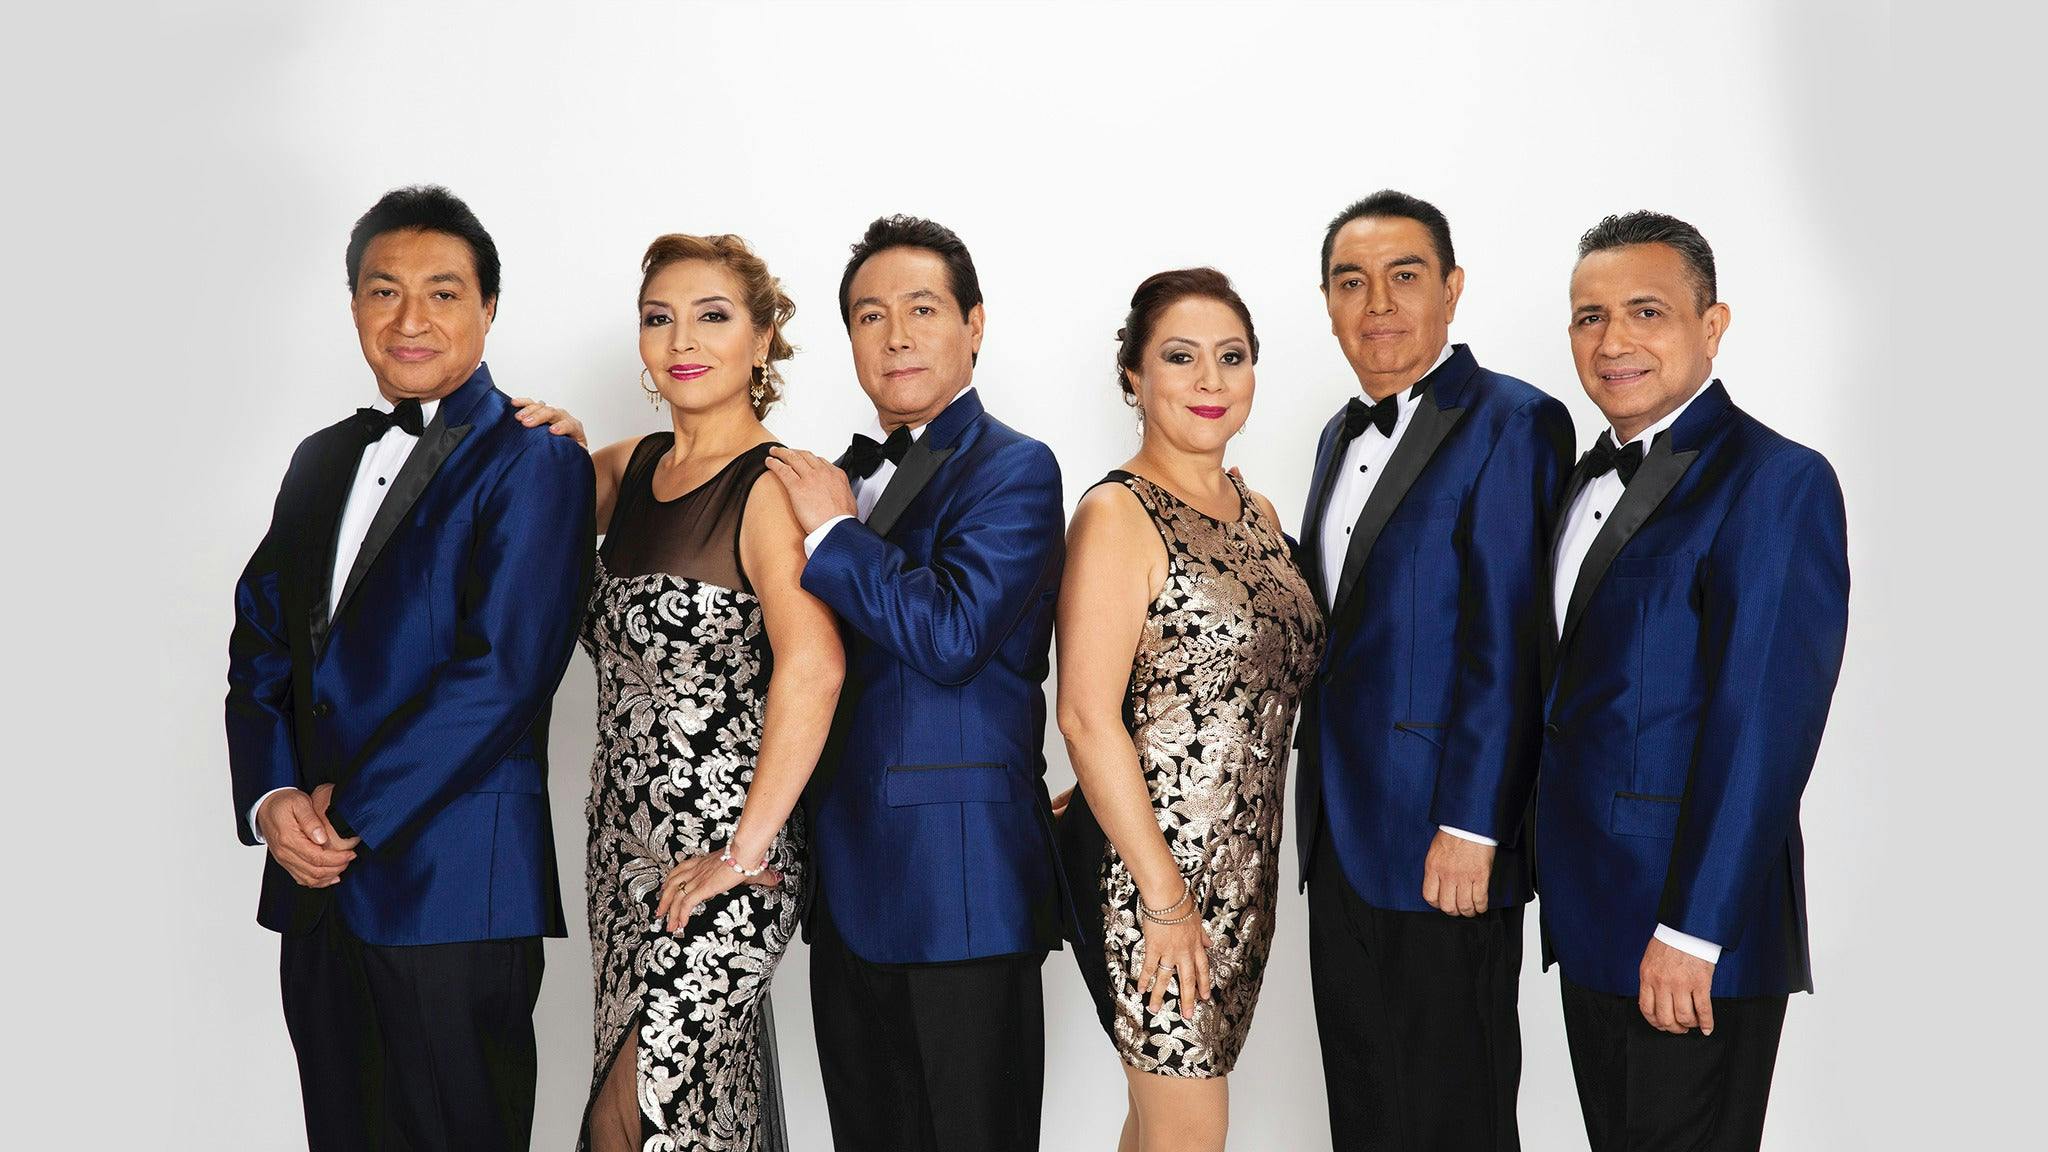 Los Ángeles Azules Events, Tickets, Tour Dates & Concerts in